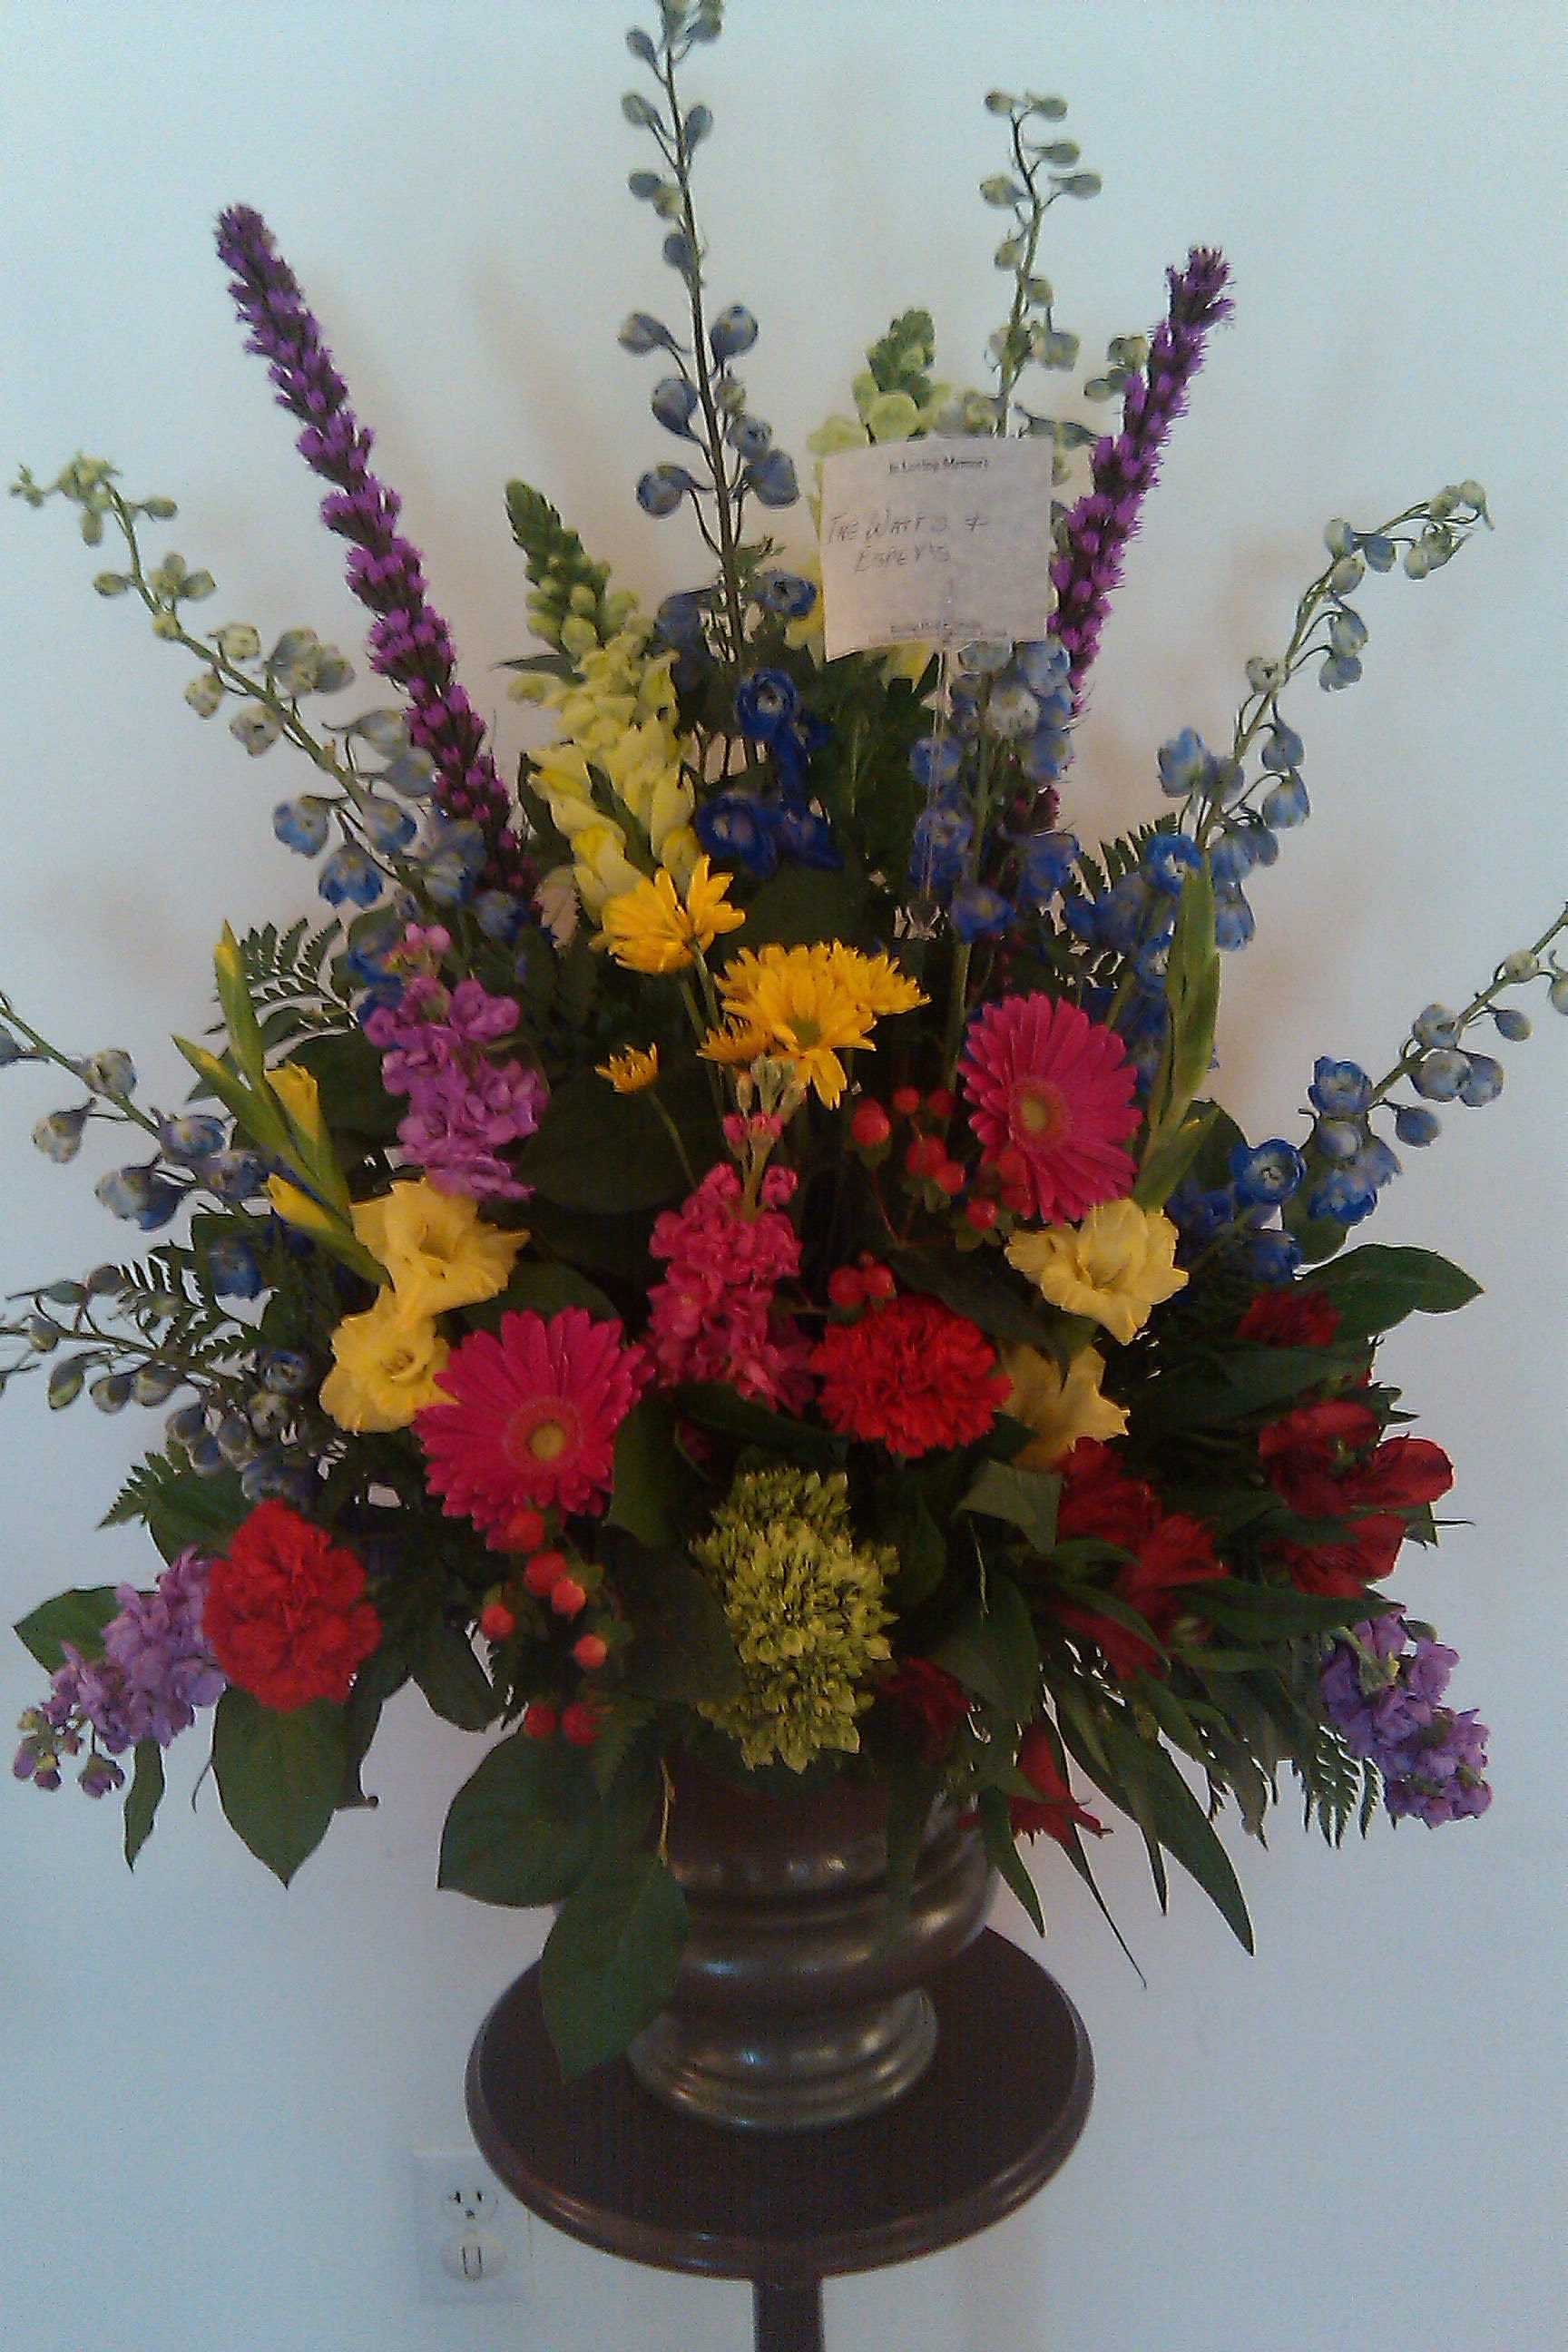  Comfort and Peace Arrangement - A Bright Garden Style table arrangement lends comfort and peaceful thoughts in this funeral design. Liatris, Gerber Daisy, Stock, Delphinium, Daisy Mums, Snap Dragon, Alstromeria, and Carnations are featured in this design.  Flower varieties and container may vary depending on availability and season.